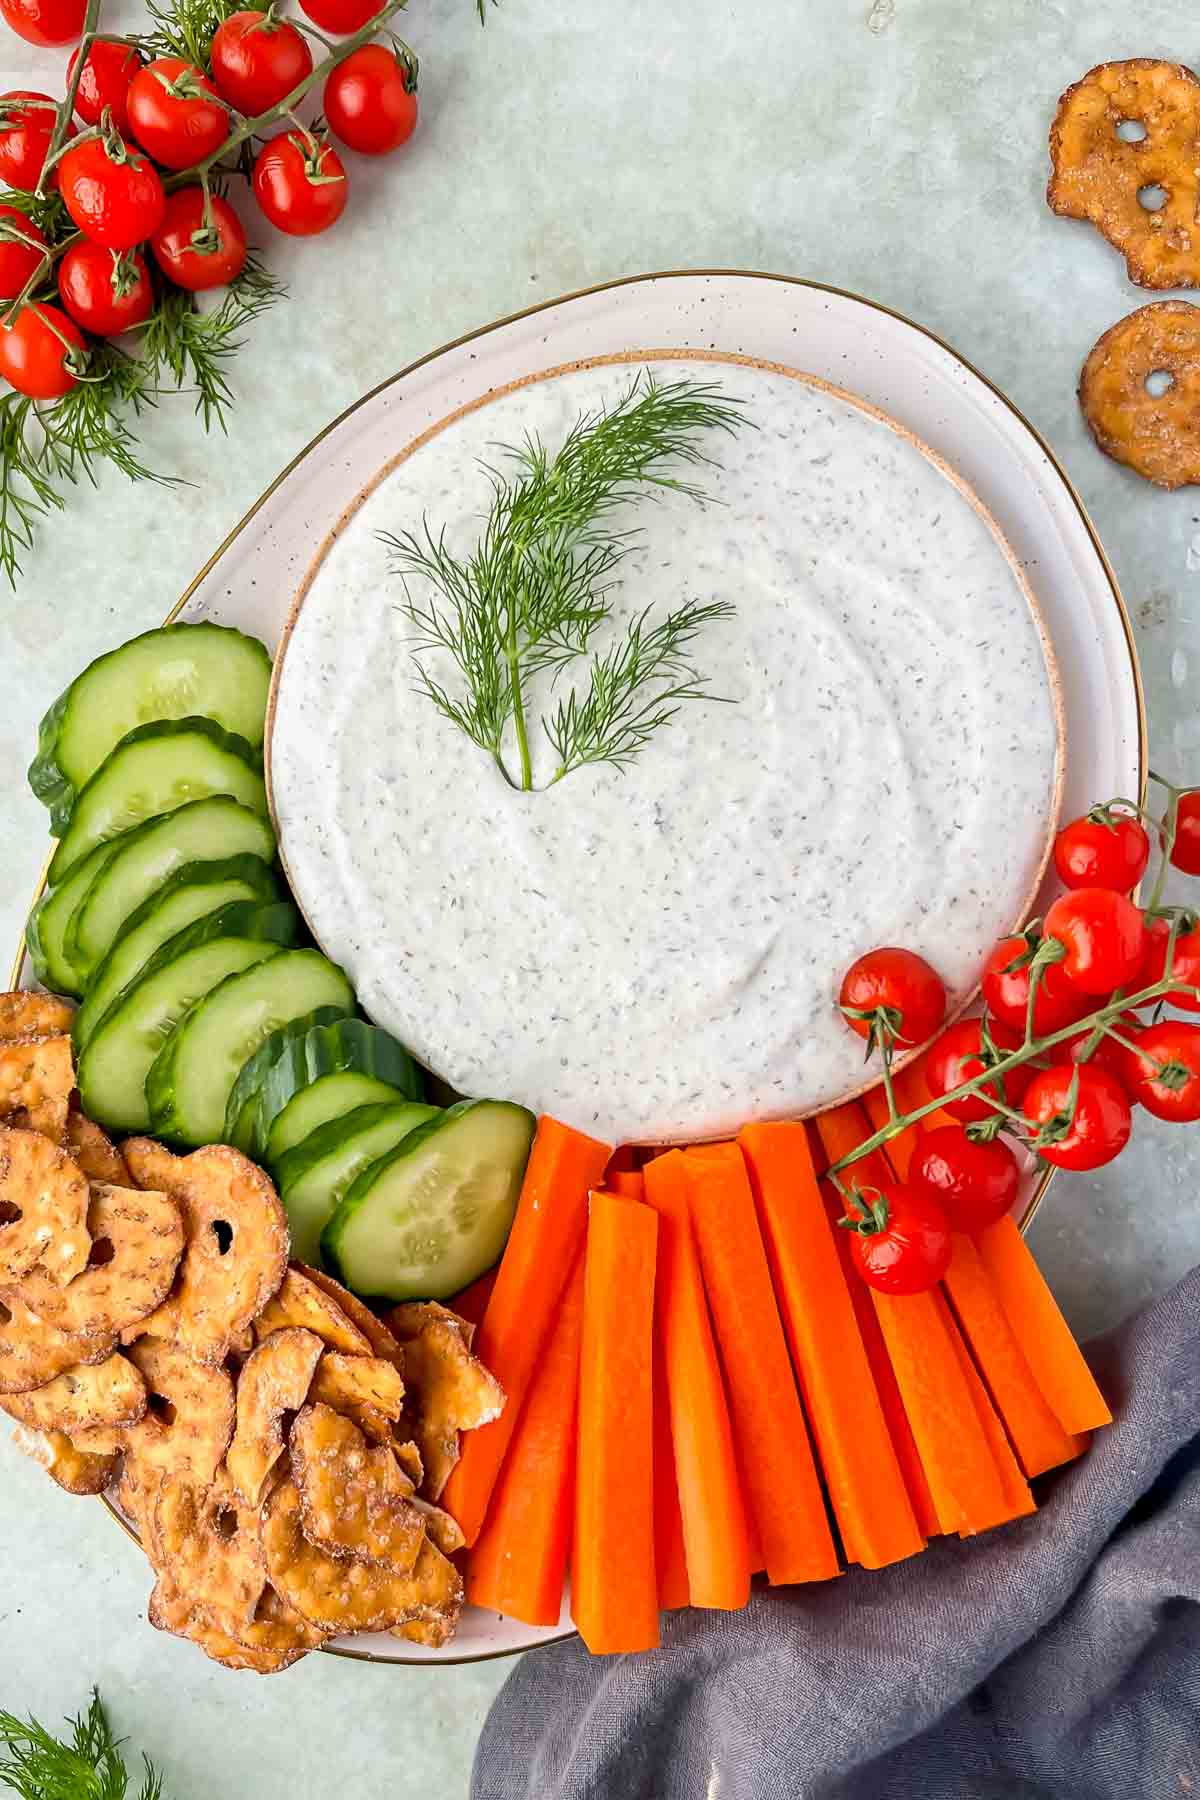 cottage cheese ranch dip with fresh dill as garnish on plate with cucumbers, carrots and pretzels.